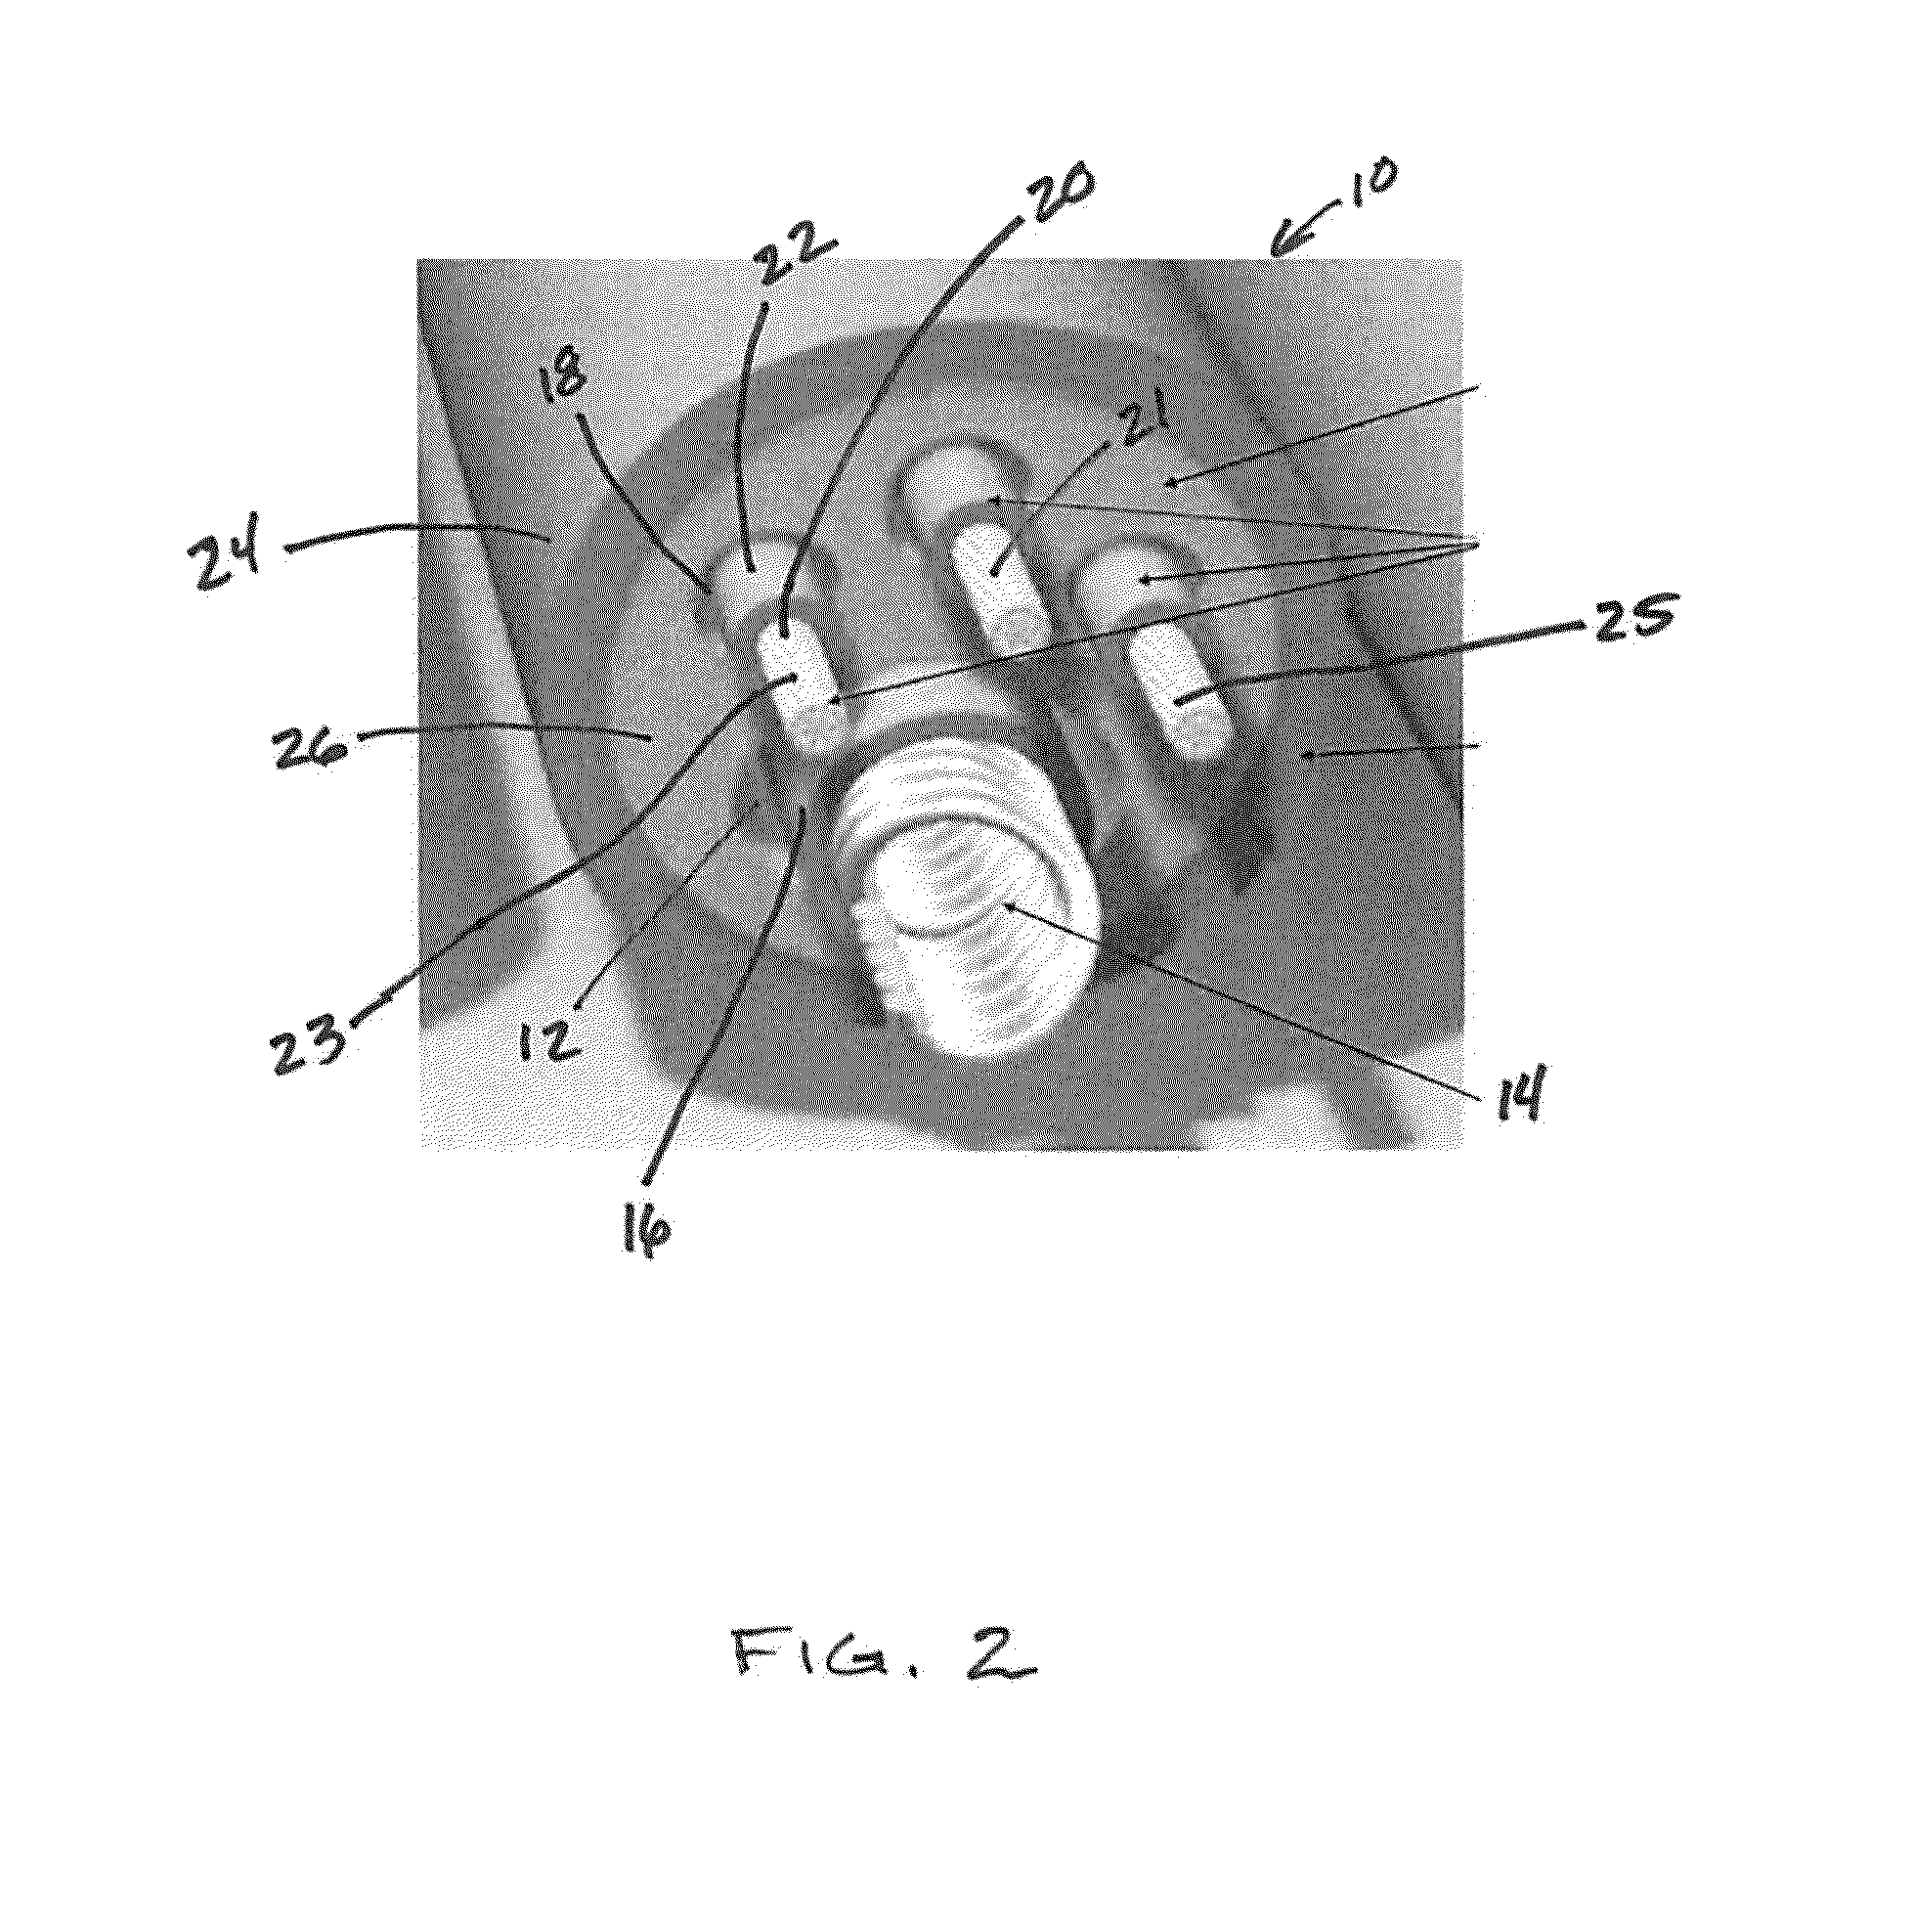 Method for detecting and treating insulation lead-to-housing failures